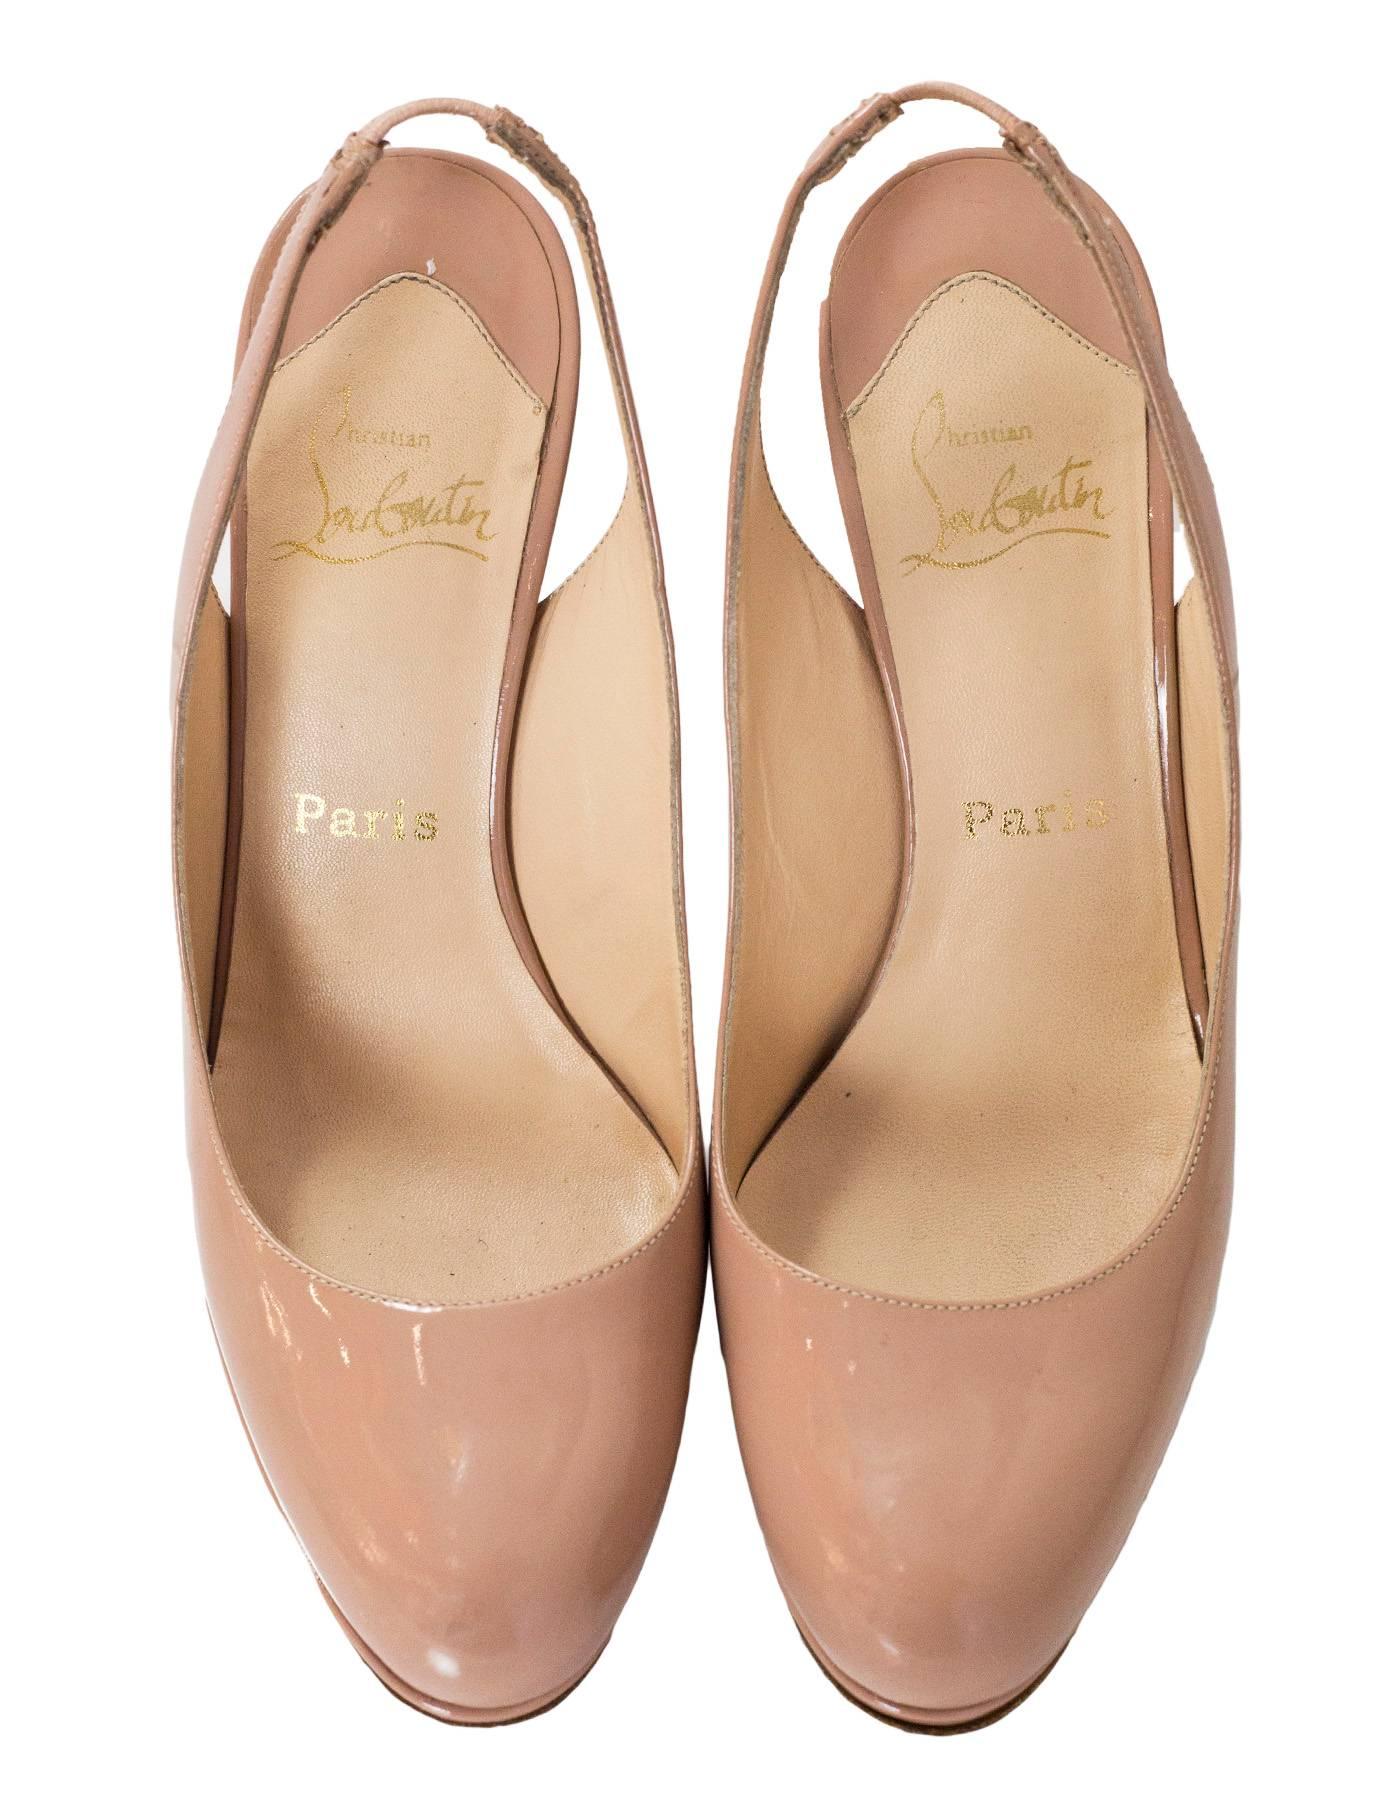 Christian Louboutin Nude Patent Slingback Pumps Sz 38 In Excellent Condition In New York, NY